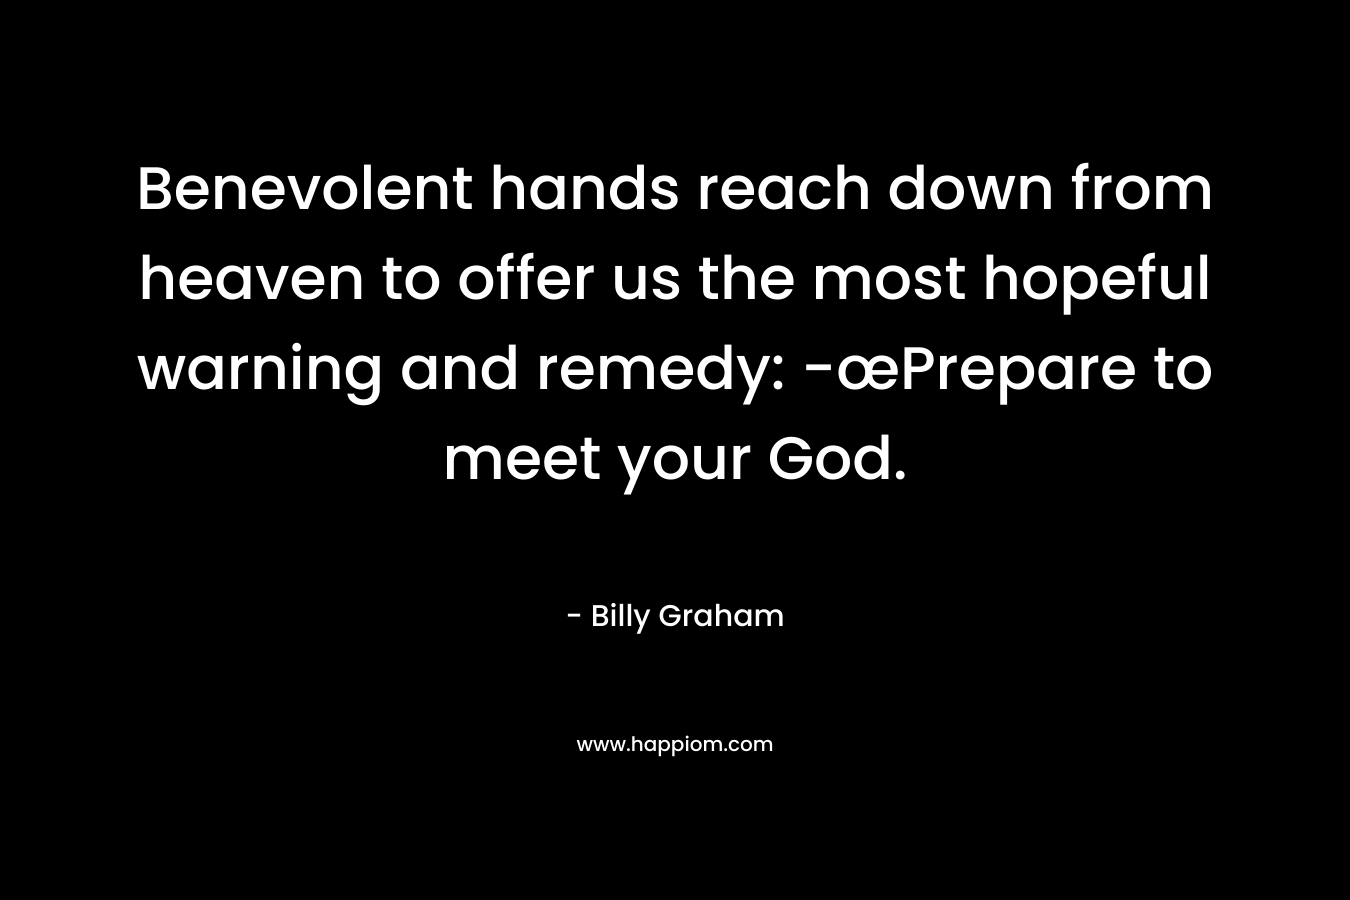 Benevolent hands reach down from heaven to offer us the most hopeful warning and remedy: -œPrepare to meet your God.